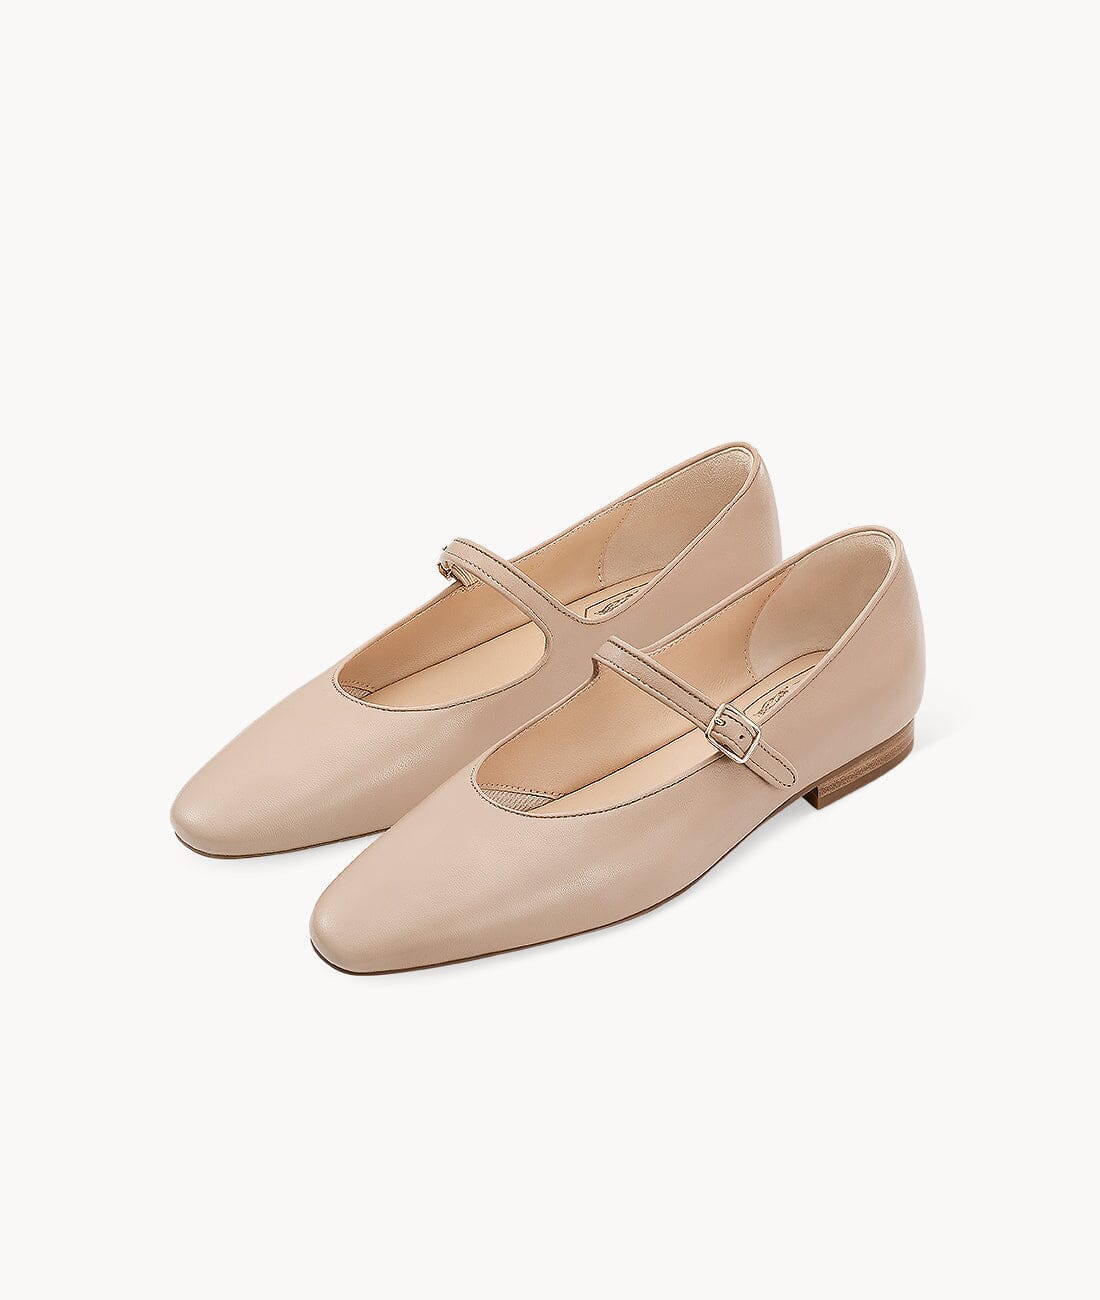 7or9 - Malt Candy - Flats&Loafers